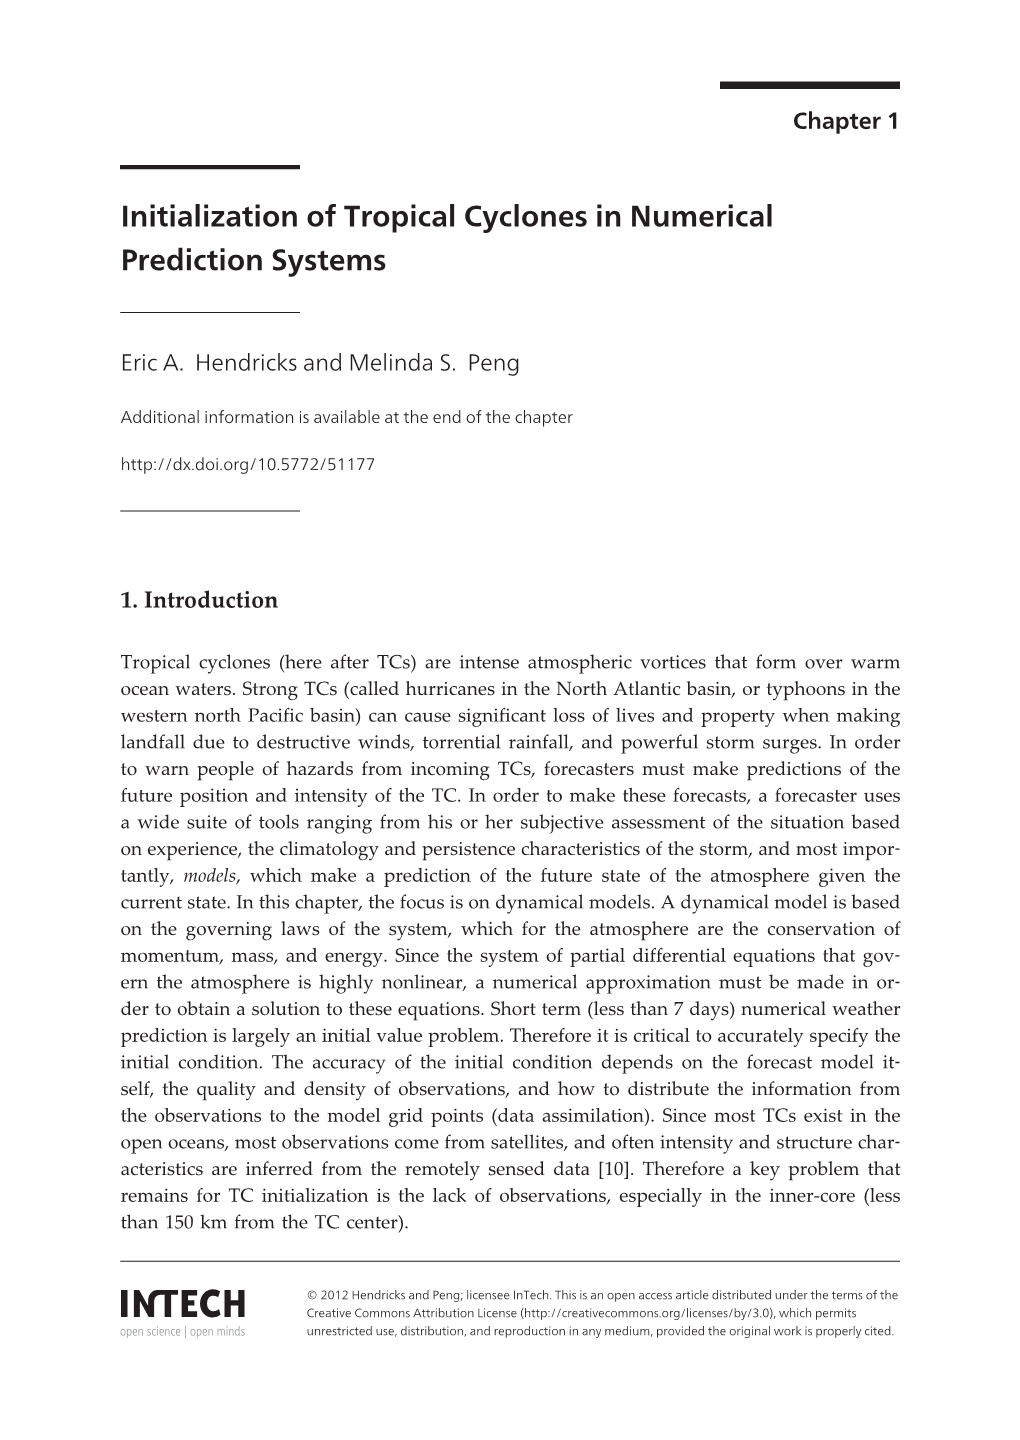 Initialization of Tropical Cyclones in Numerical Prediction Systems